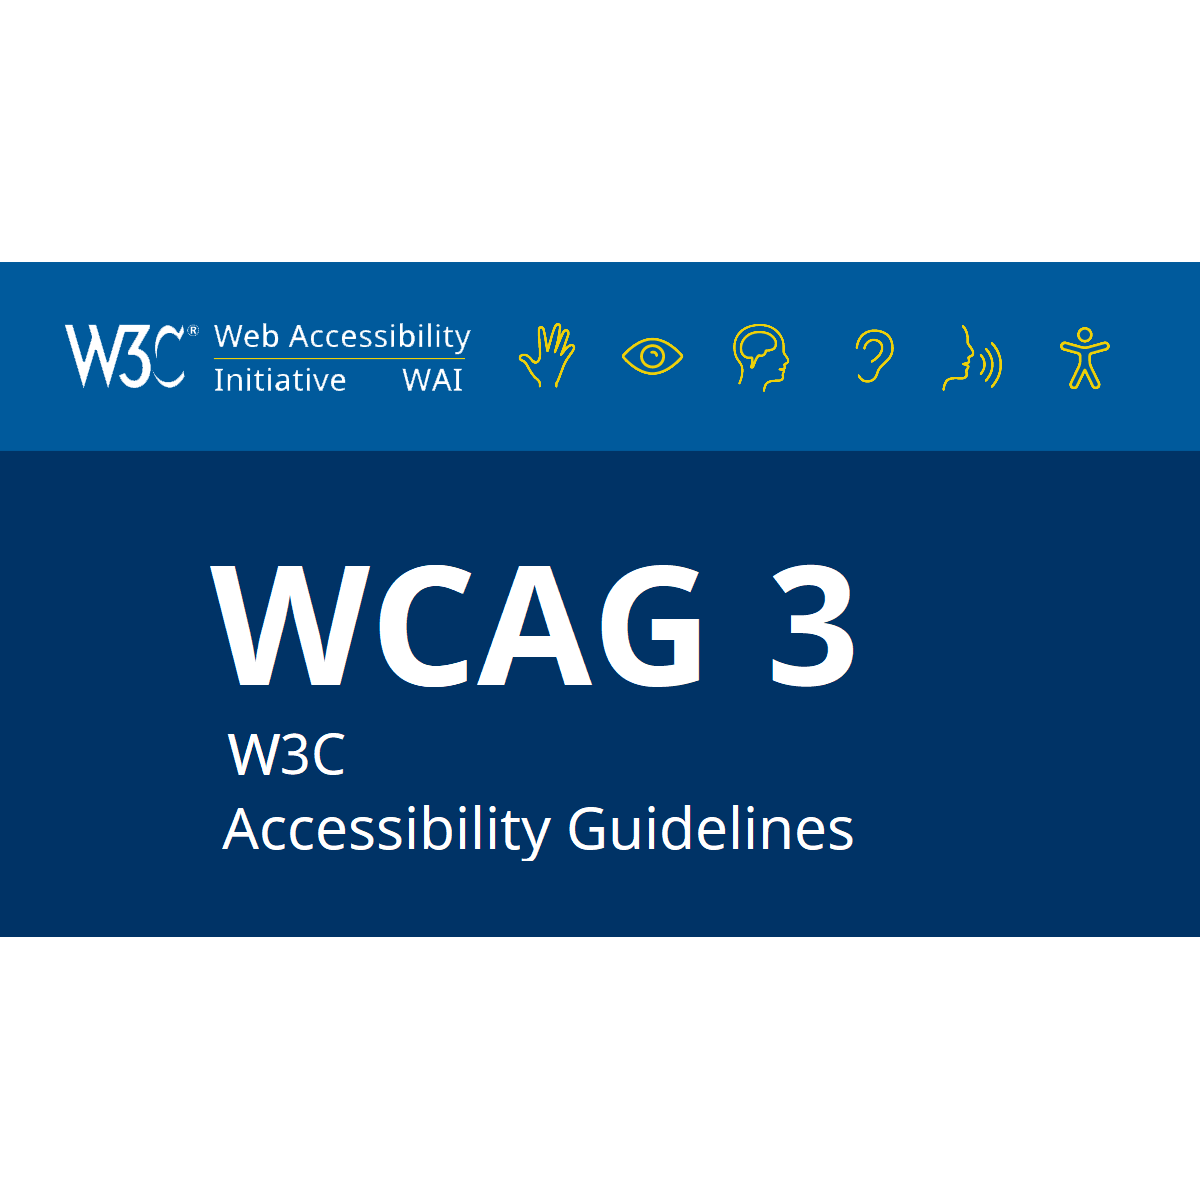 Upcoming WCAG 3.0 Guidelines